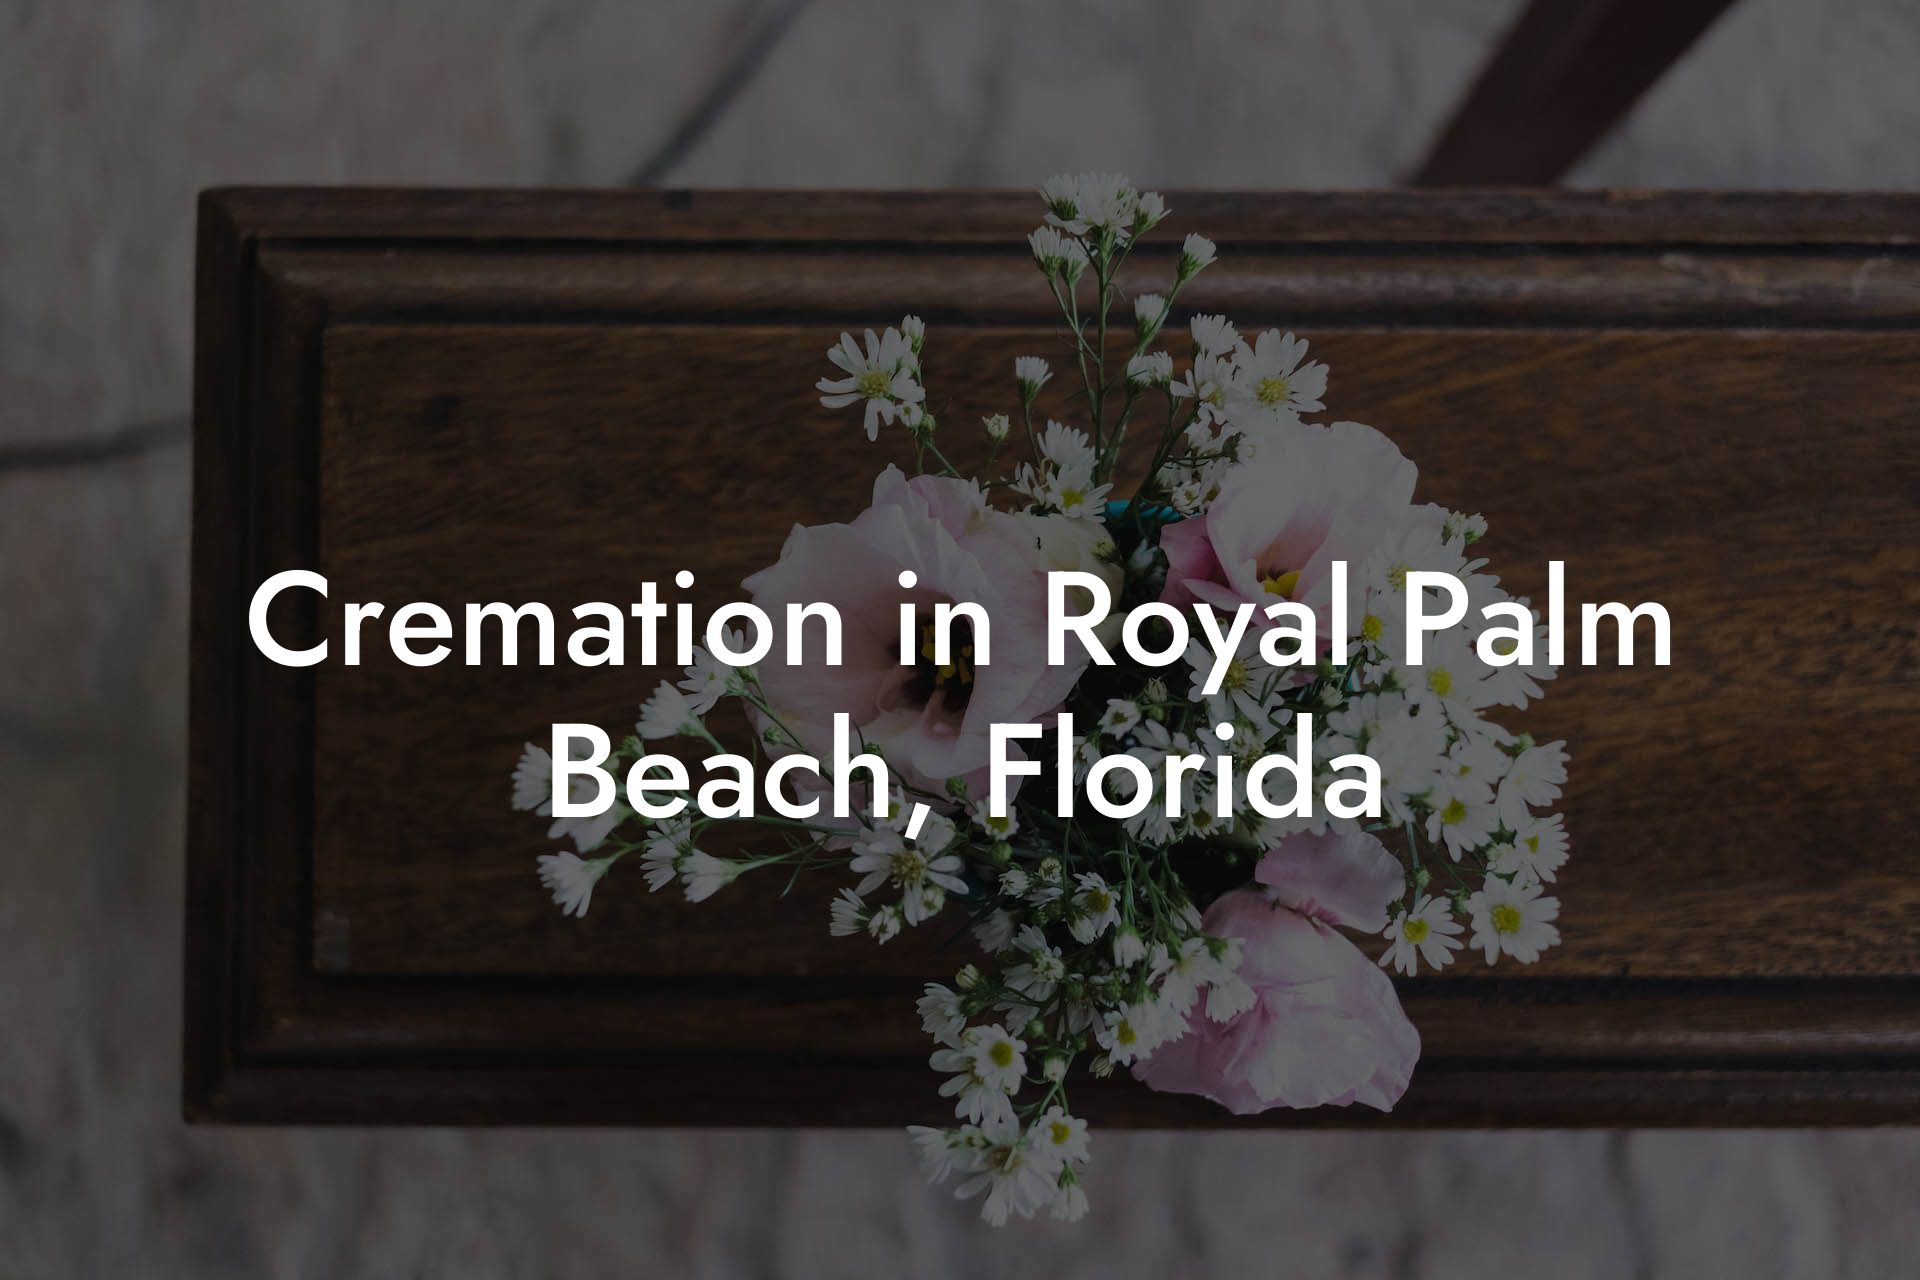 Cremation in Royal Palm Beach, Florida